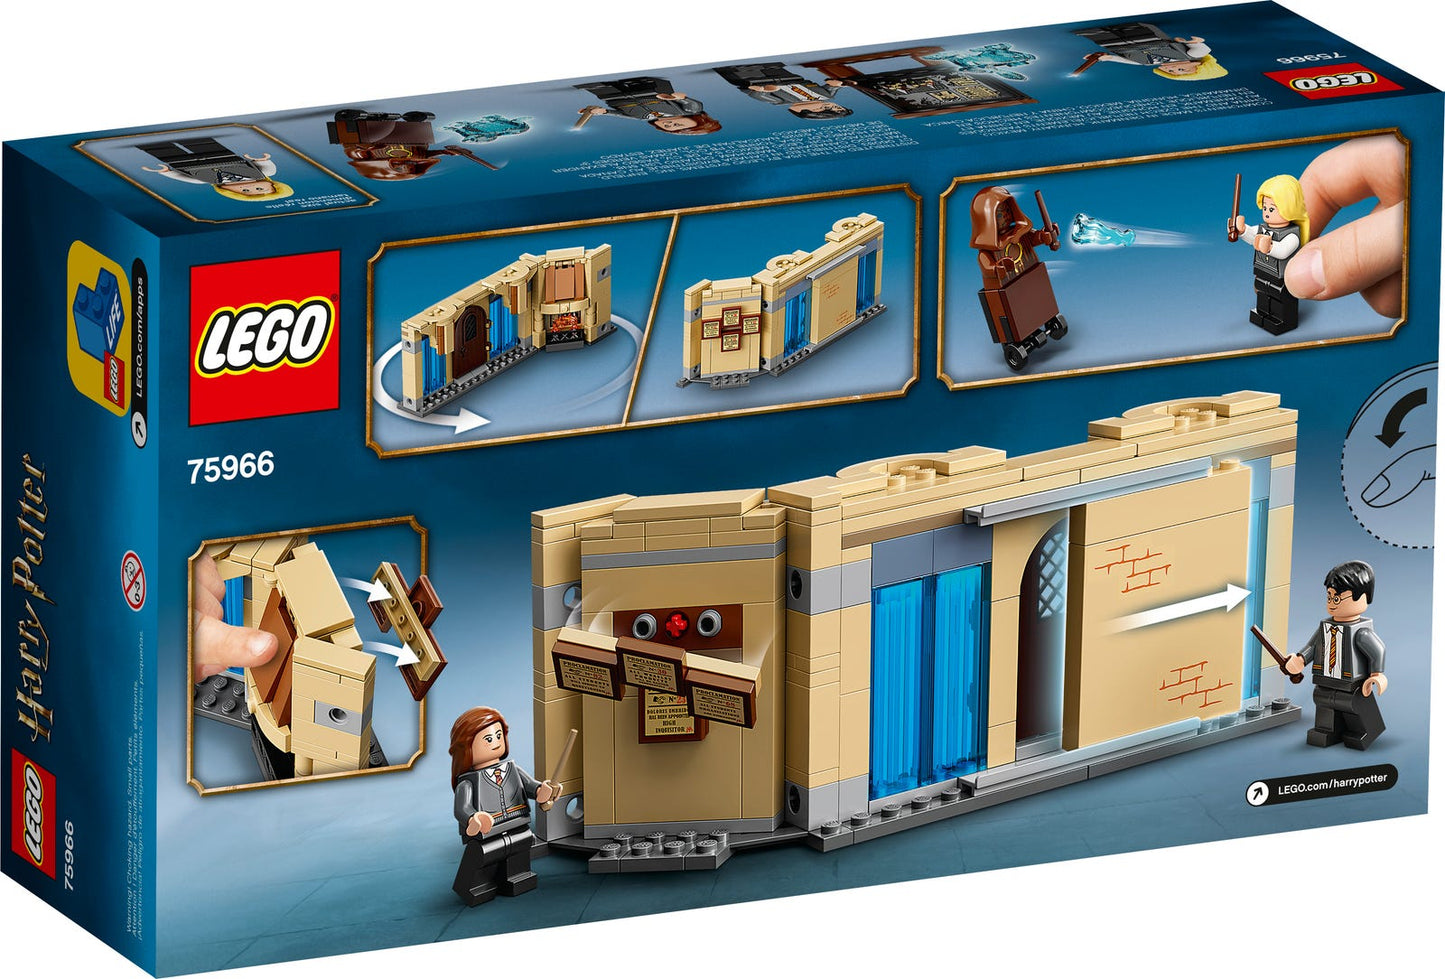 LEGO Harry Potter Hogwarts Room of Requirement 75966